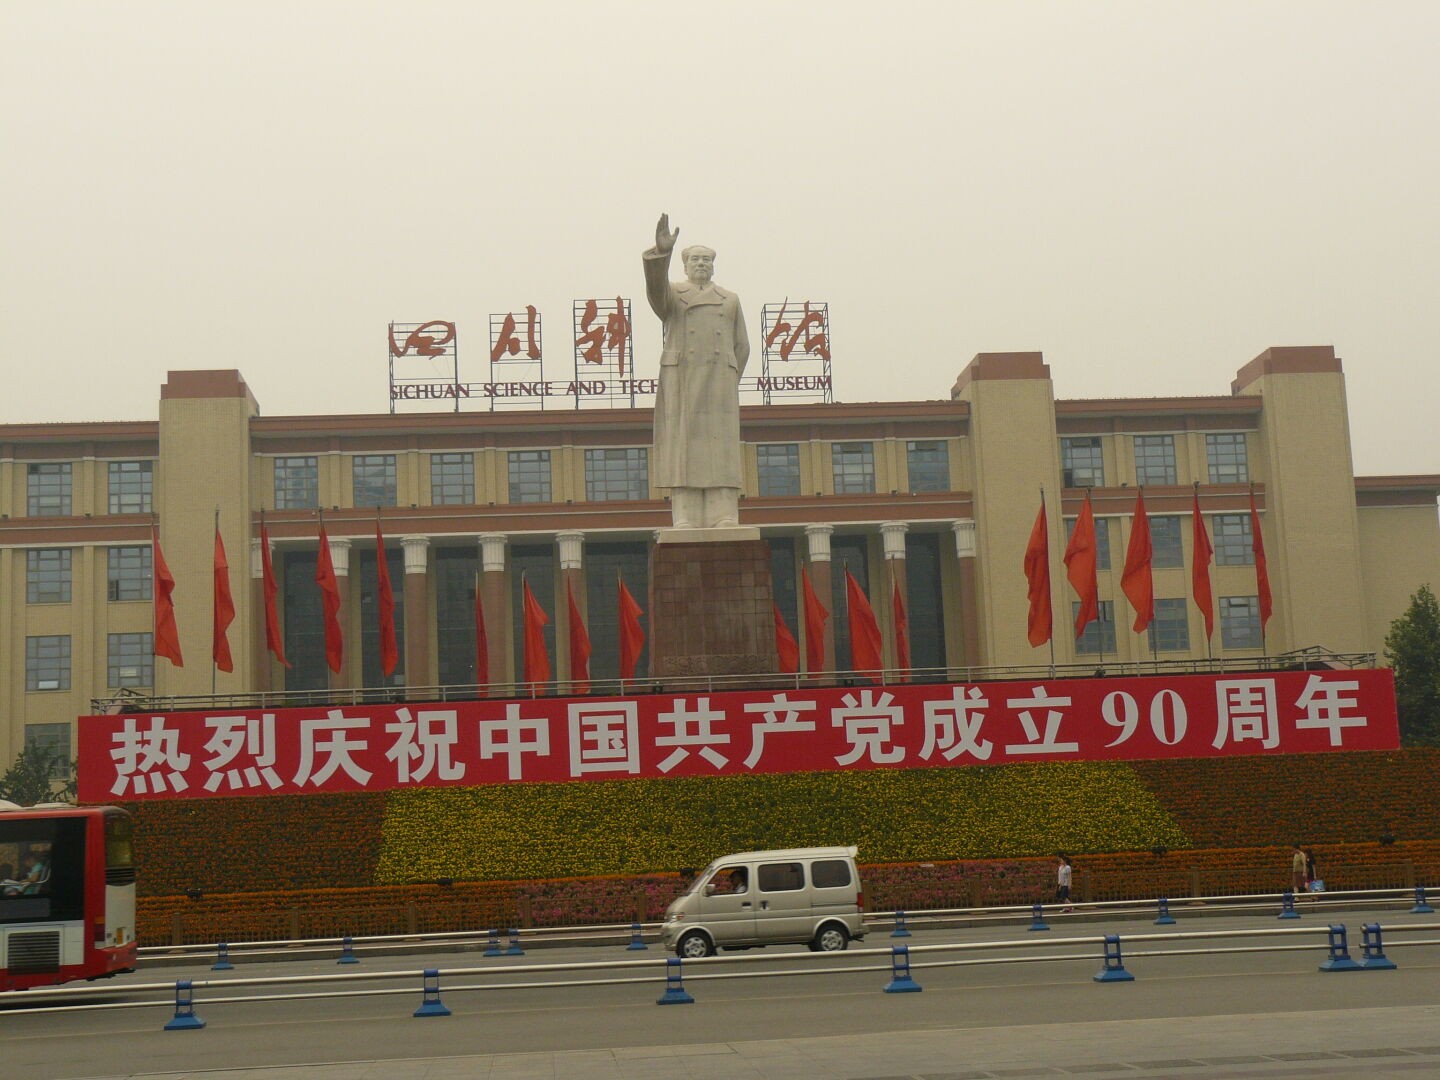 Many people had photos taken of themselves in front of the Mao statue.